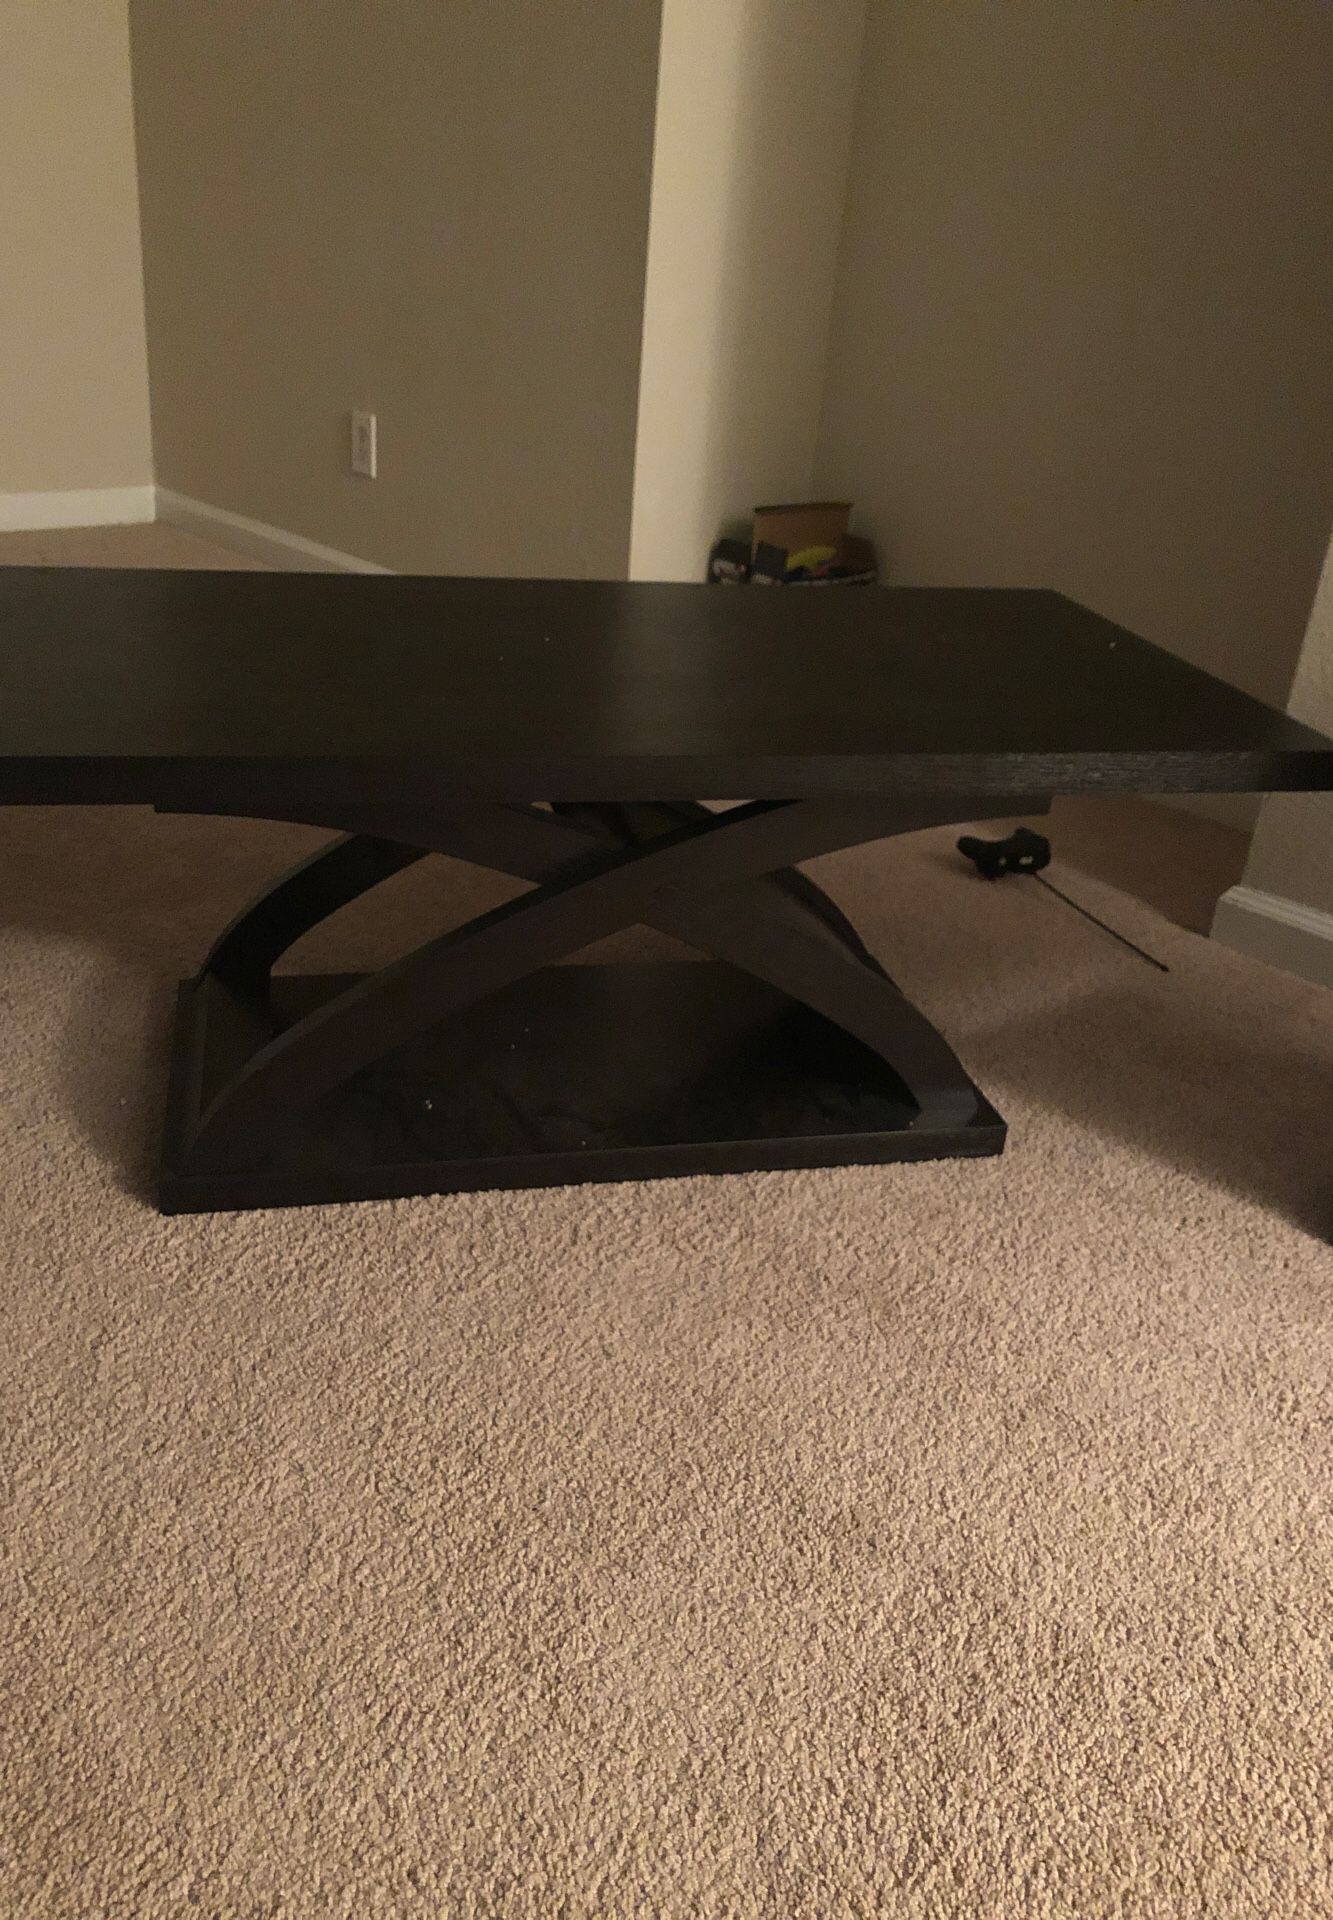 Coffee table (1 table)